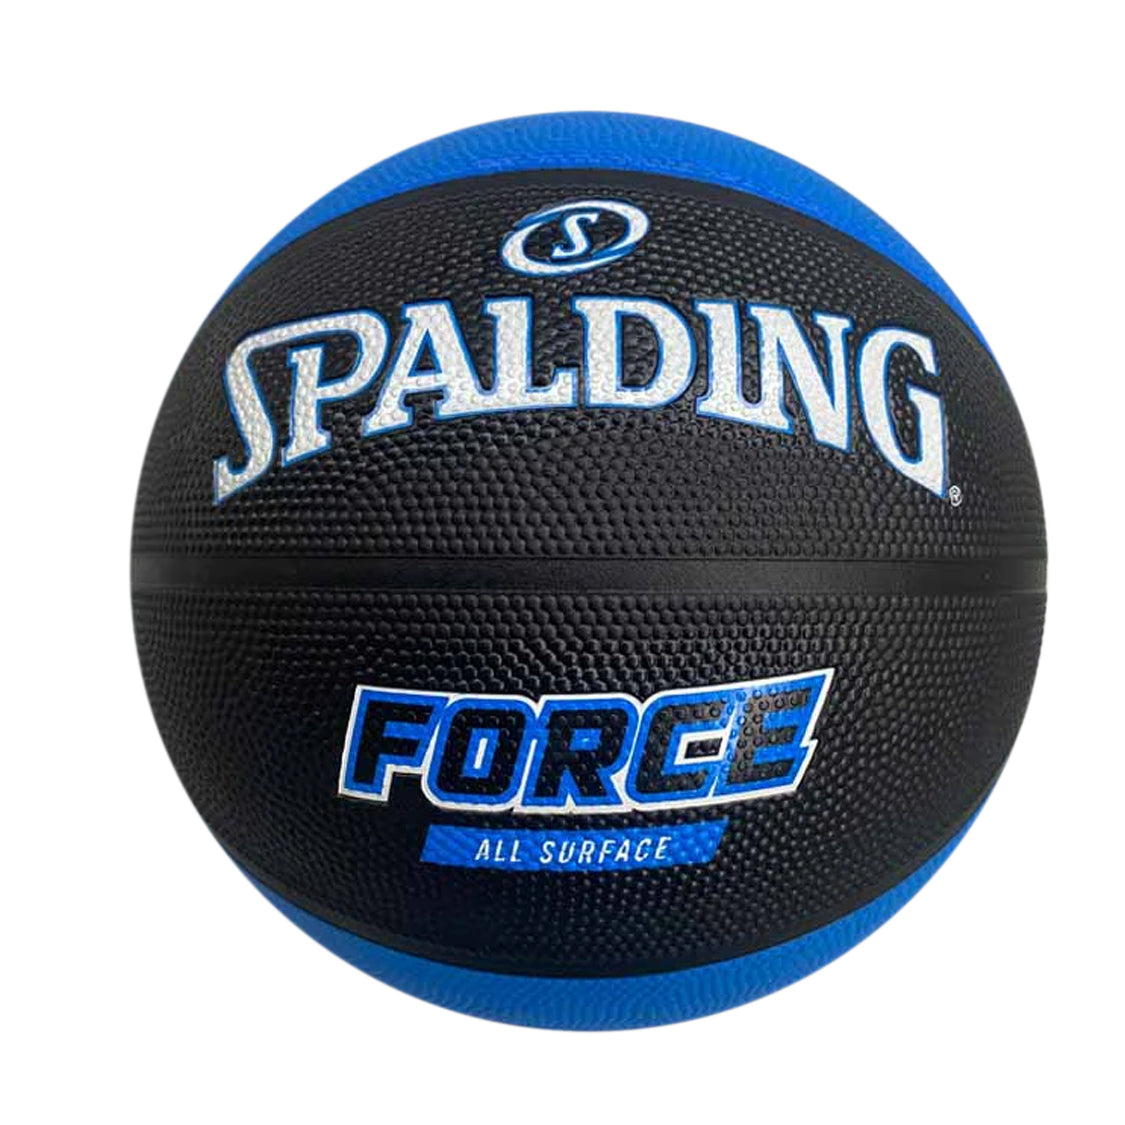 Spalding Force All Surface Basketball, Size 7 (Blue/Black